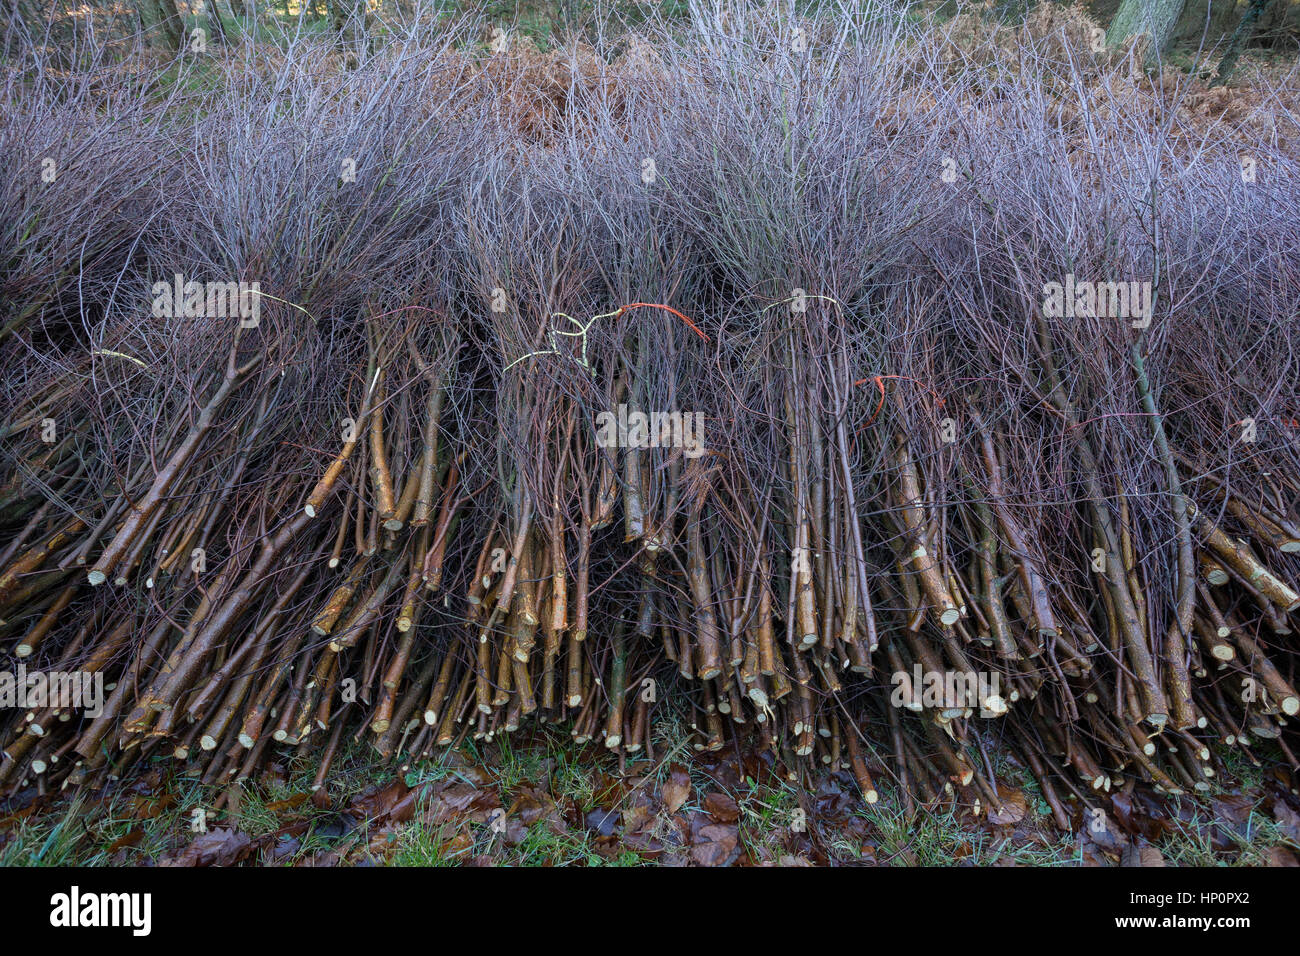 Bundles of saplings cut down on managed heathland landscape in South Wales. Stock Photo